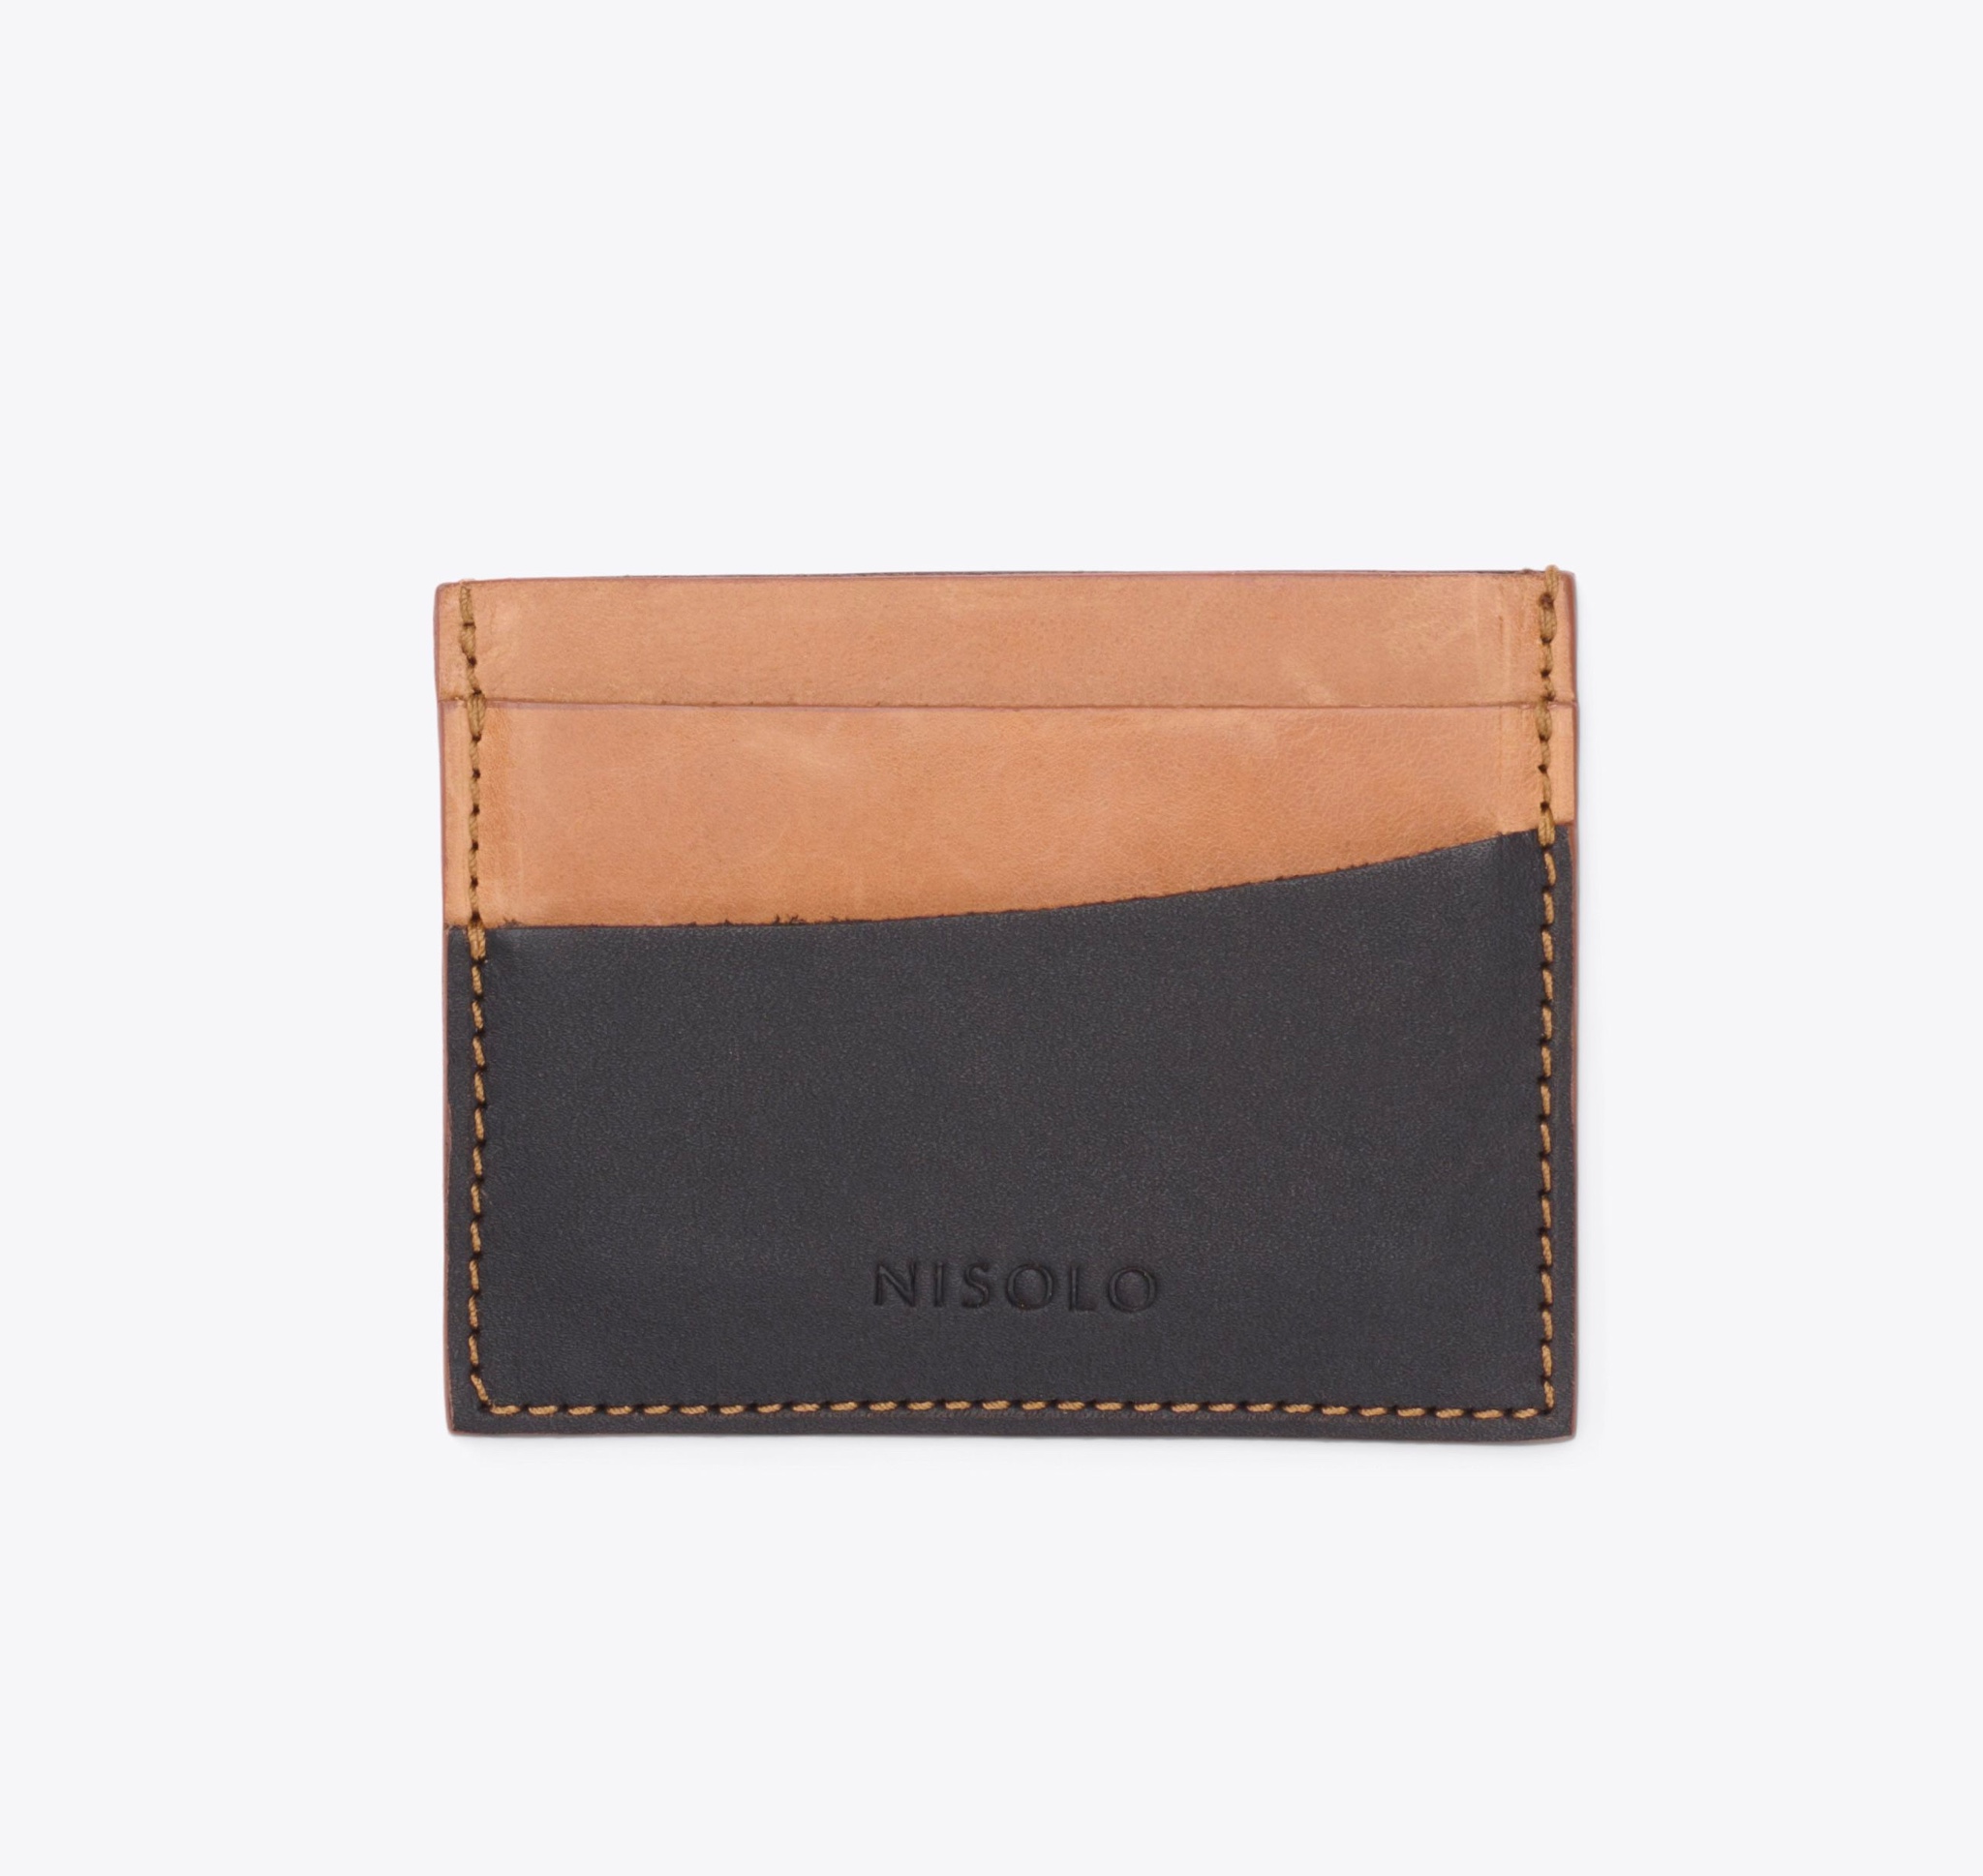 Nisolo Upcycled Leather Card Case Almond/Black - Every Nisolo product is built on the foundation of comfort, function, and design. 